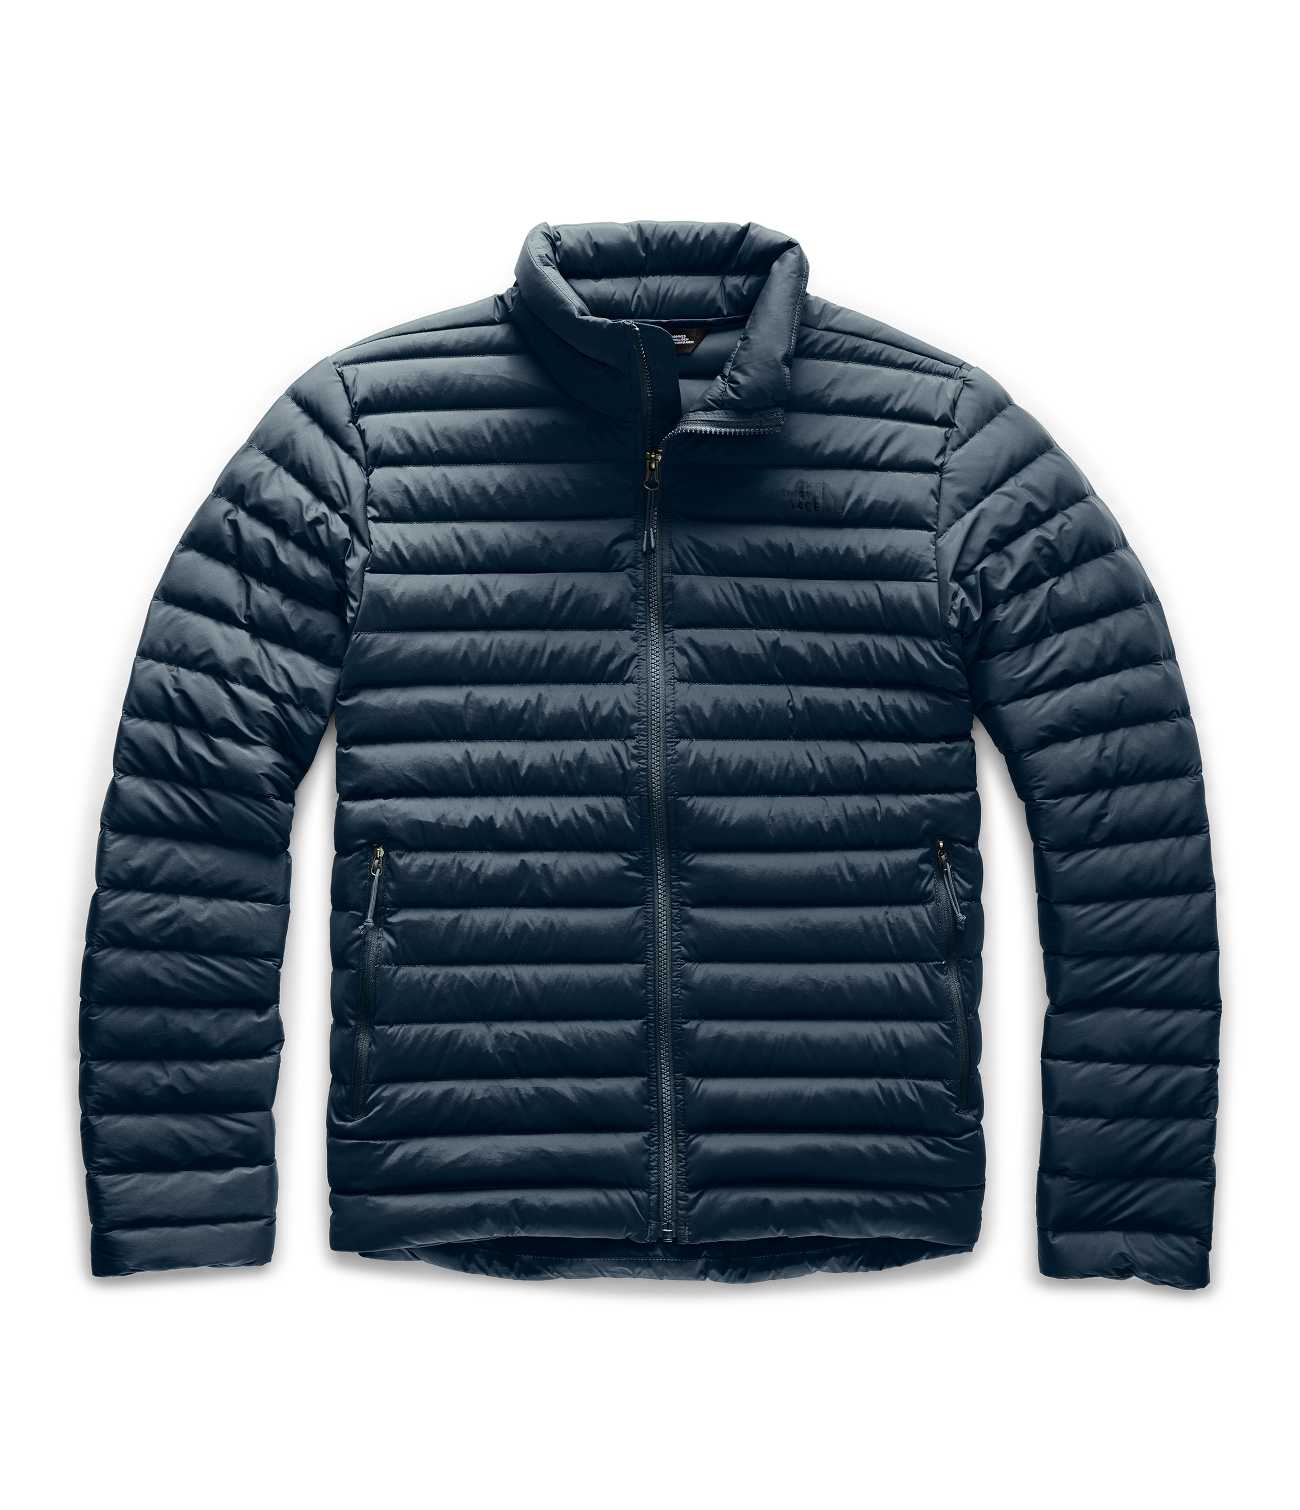 Do Foresight Overcast the north face blouson homme sex extend convertible